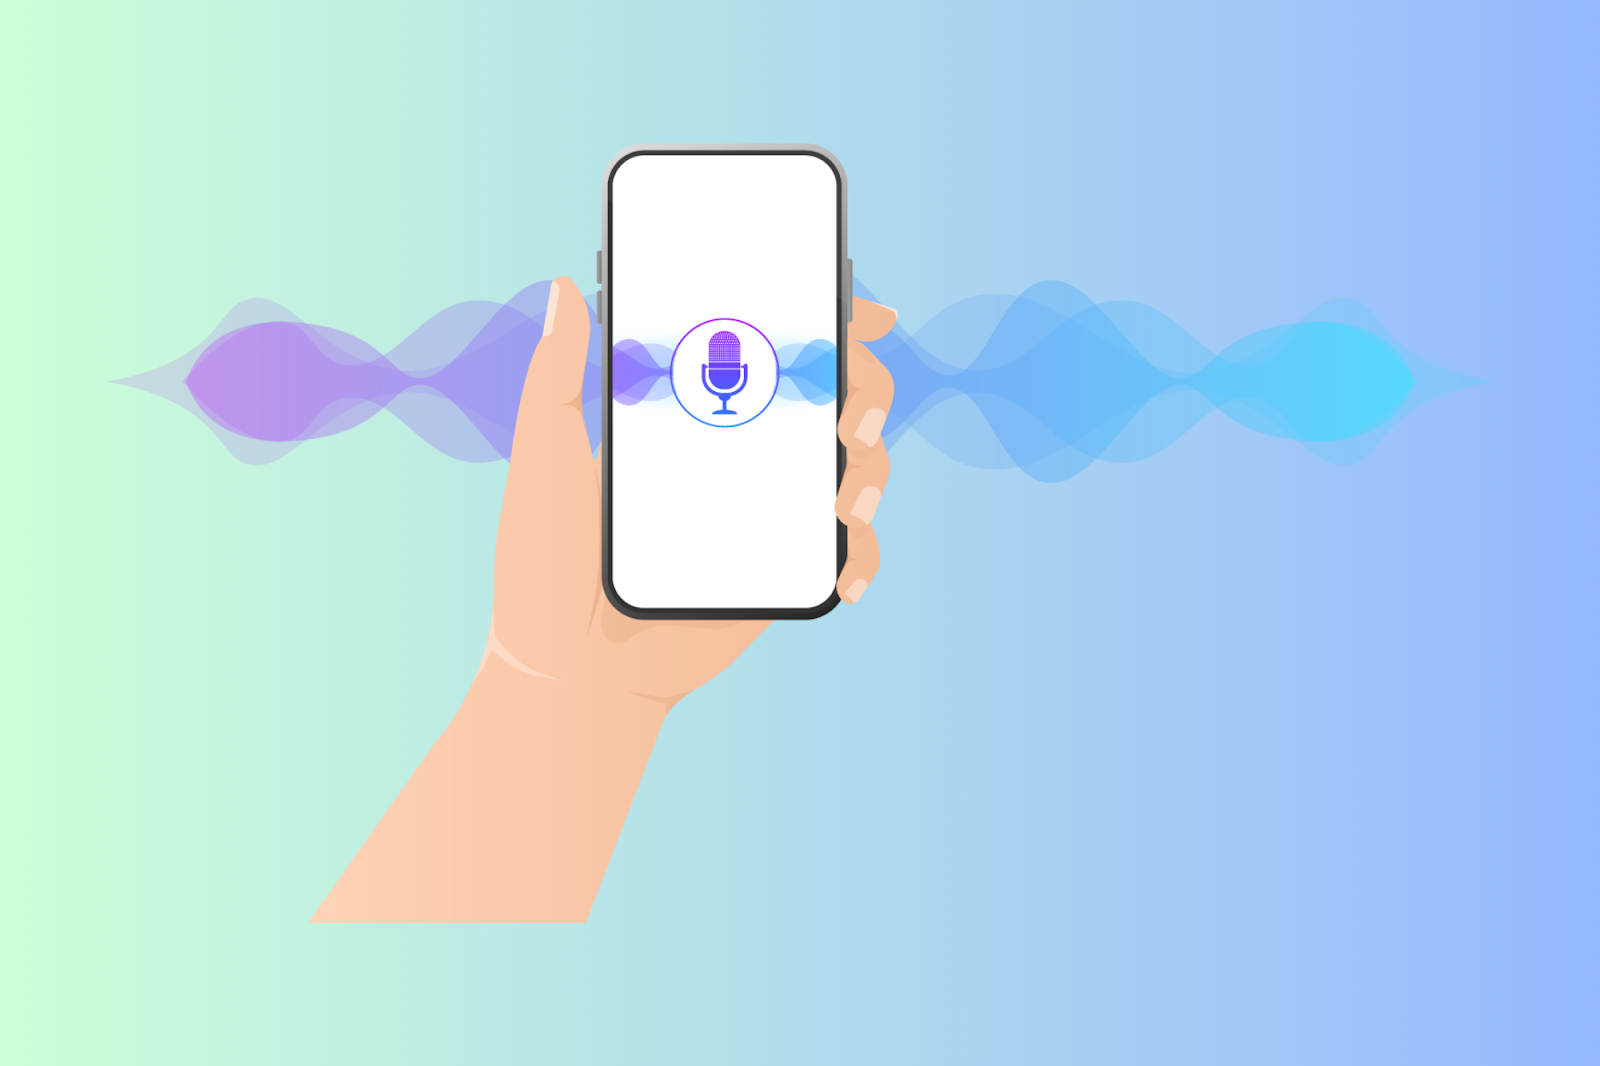 Optimization for Mobile Search and Voice Search